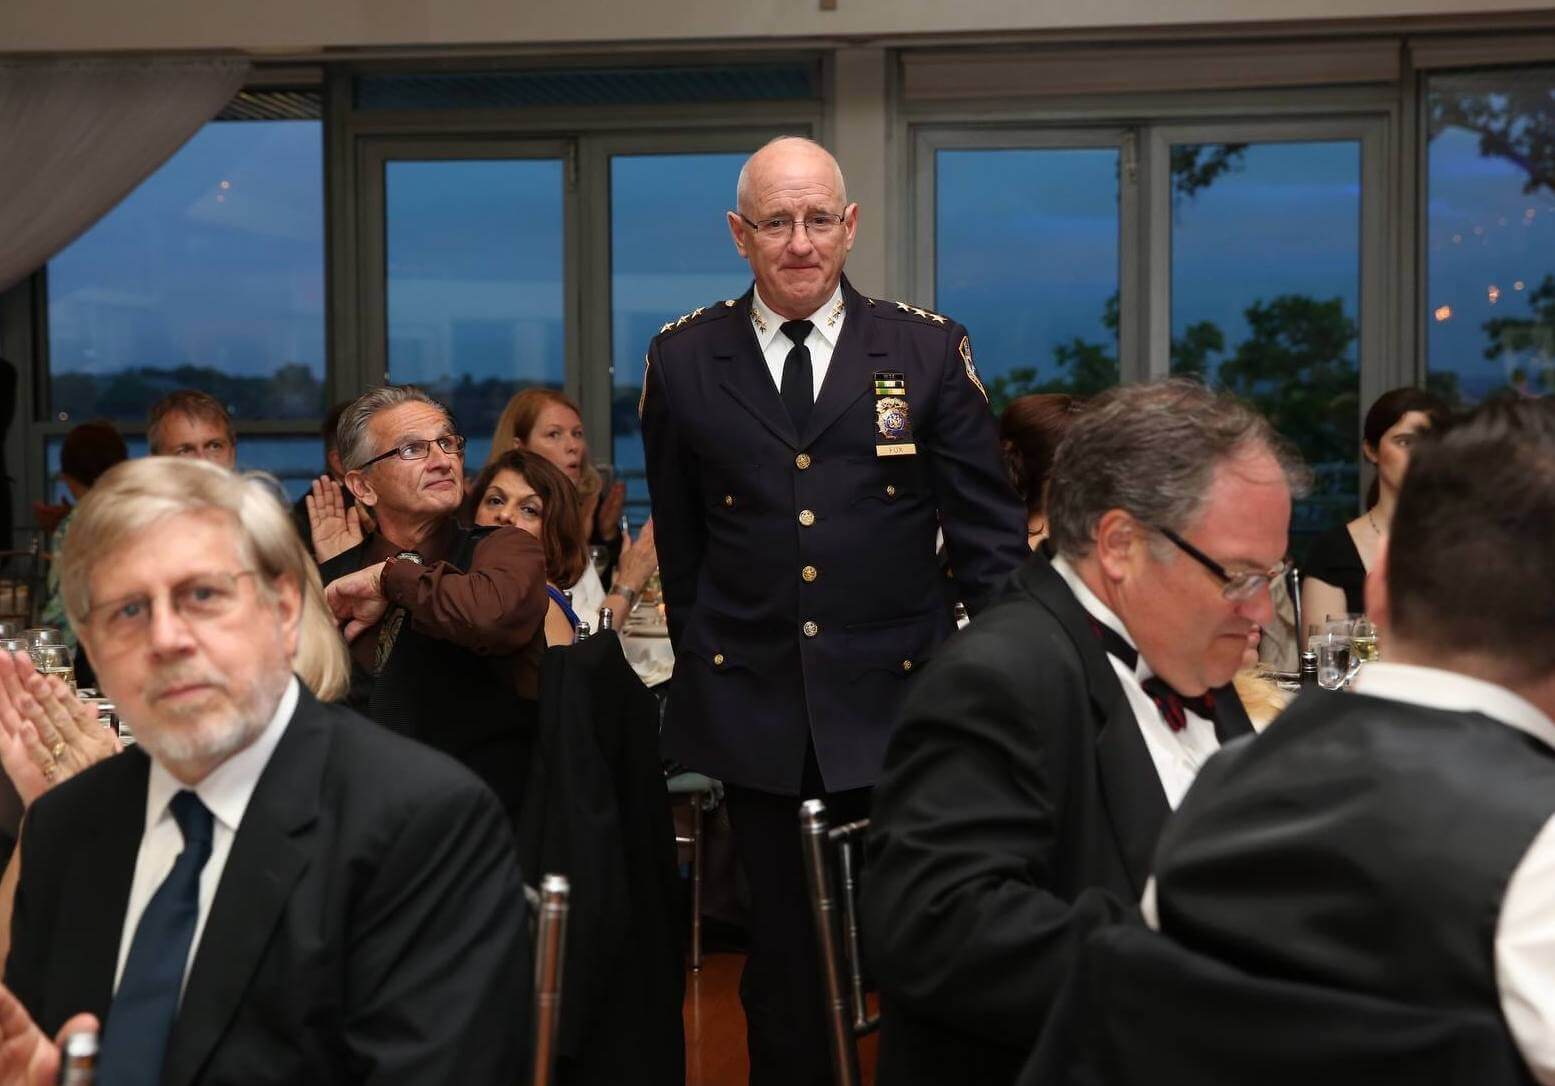 Chief Fox honored by the NY Press Photographers Association